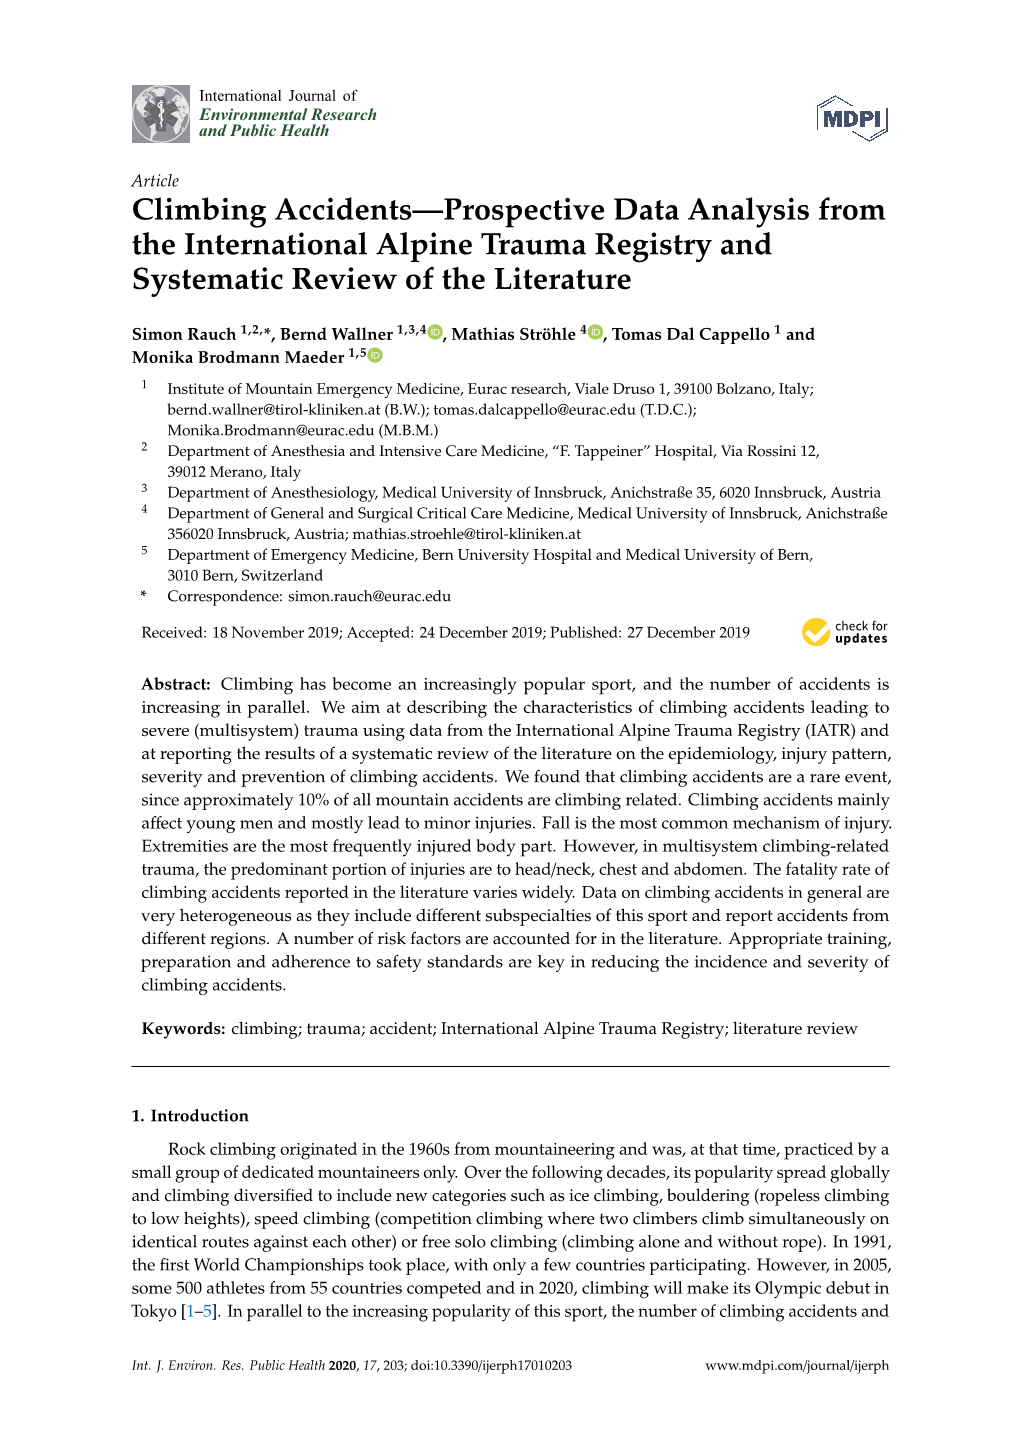 Climbing Accidents—Prospective Data Analysis from the International Alpine Trauma Registry and Systematic Review of the Literature